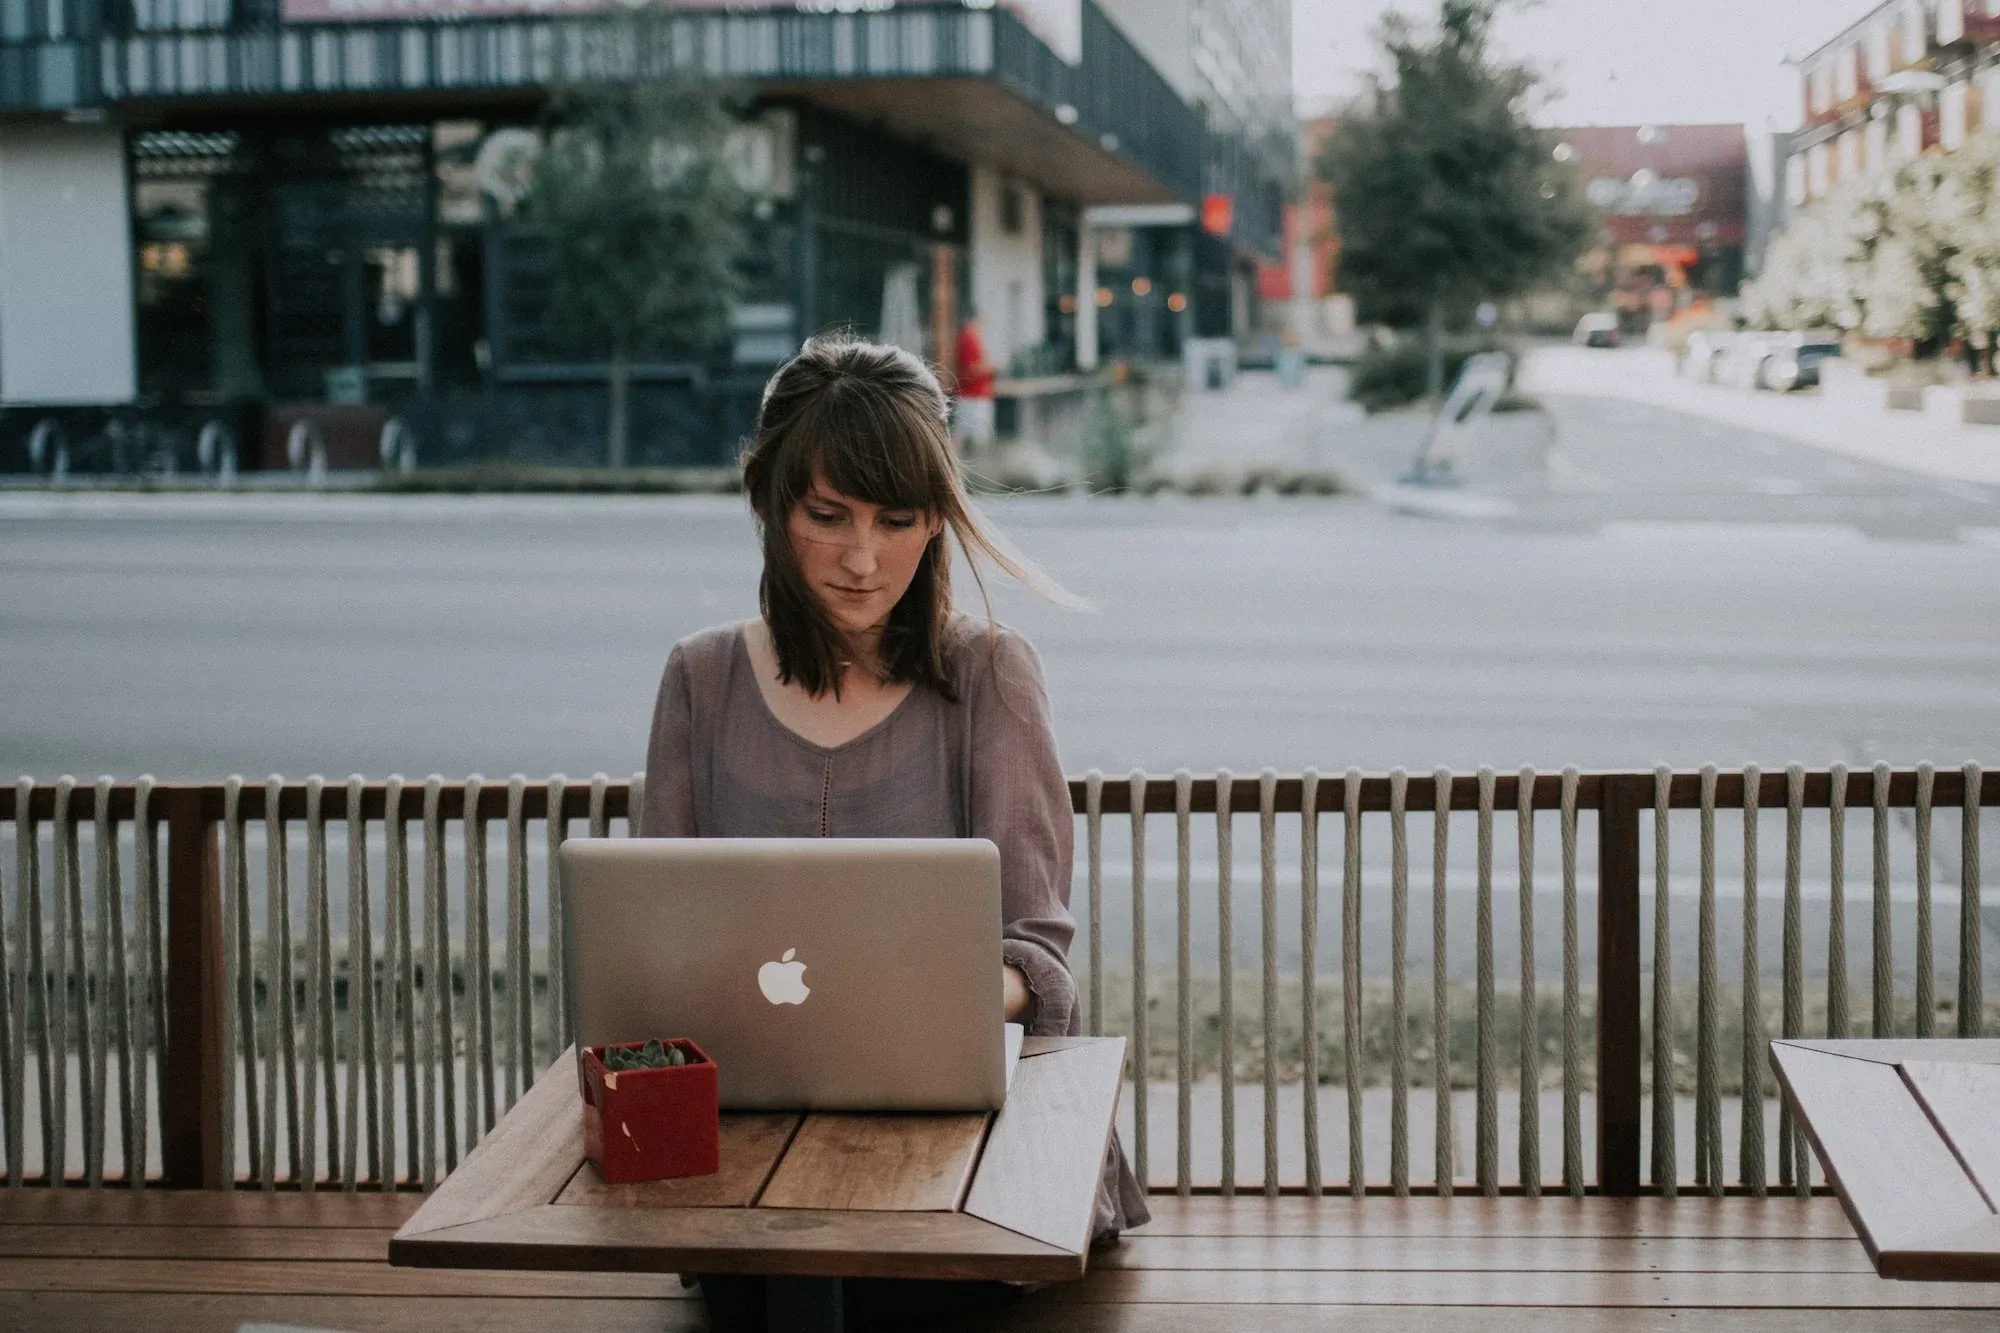 Image of a remote worker in a cafe setting